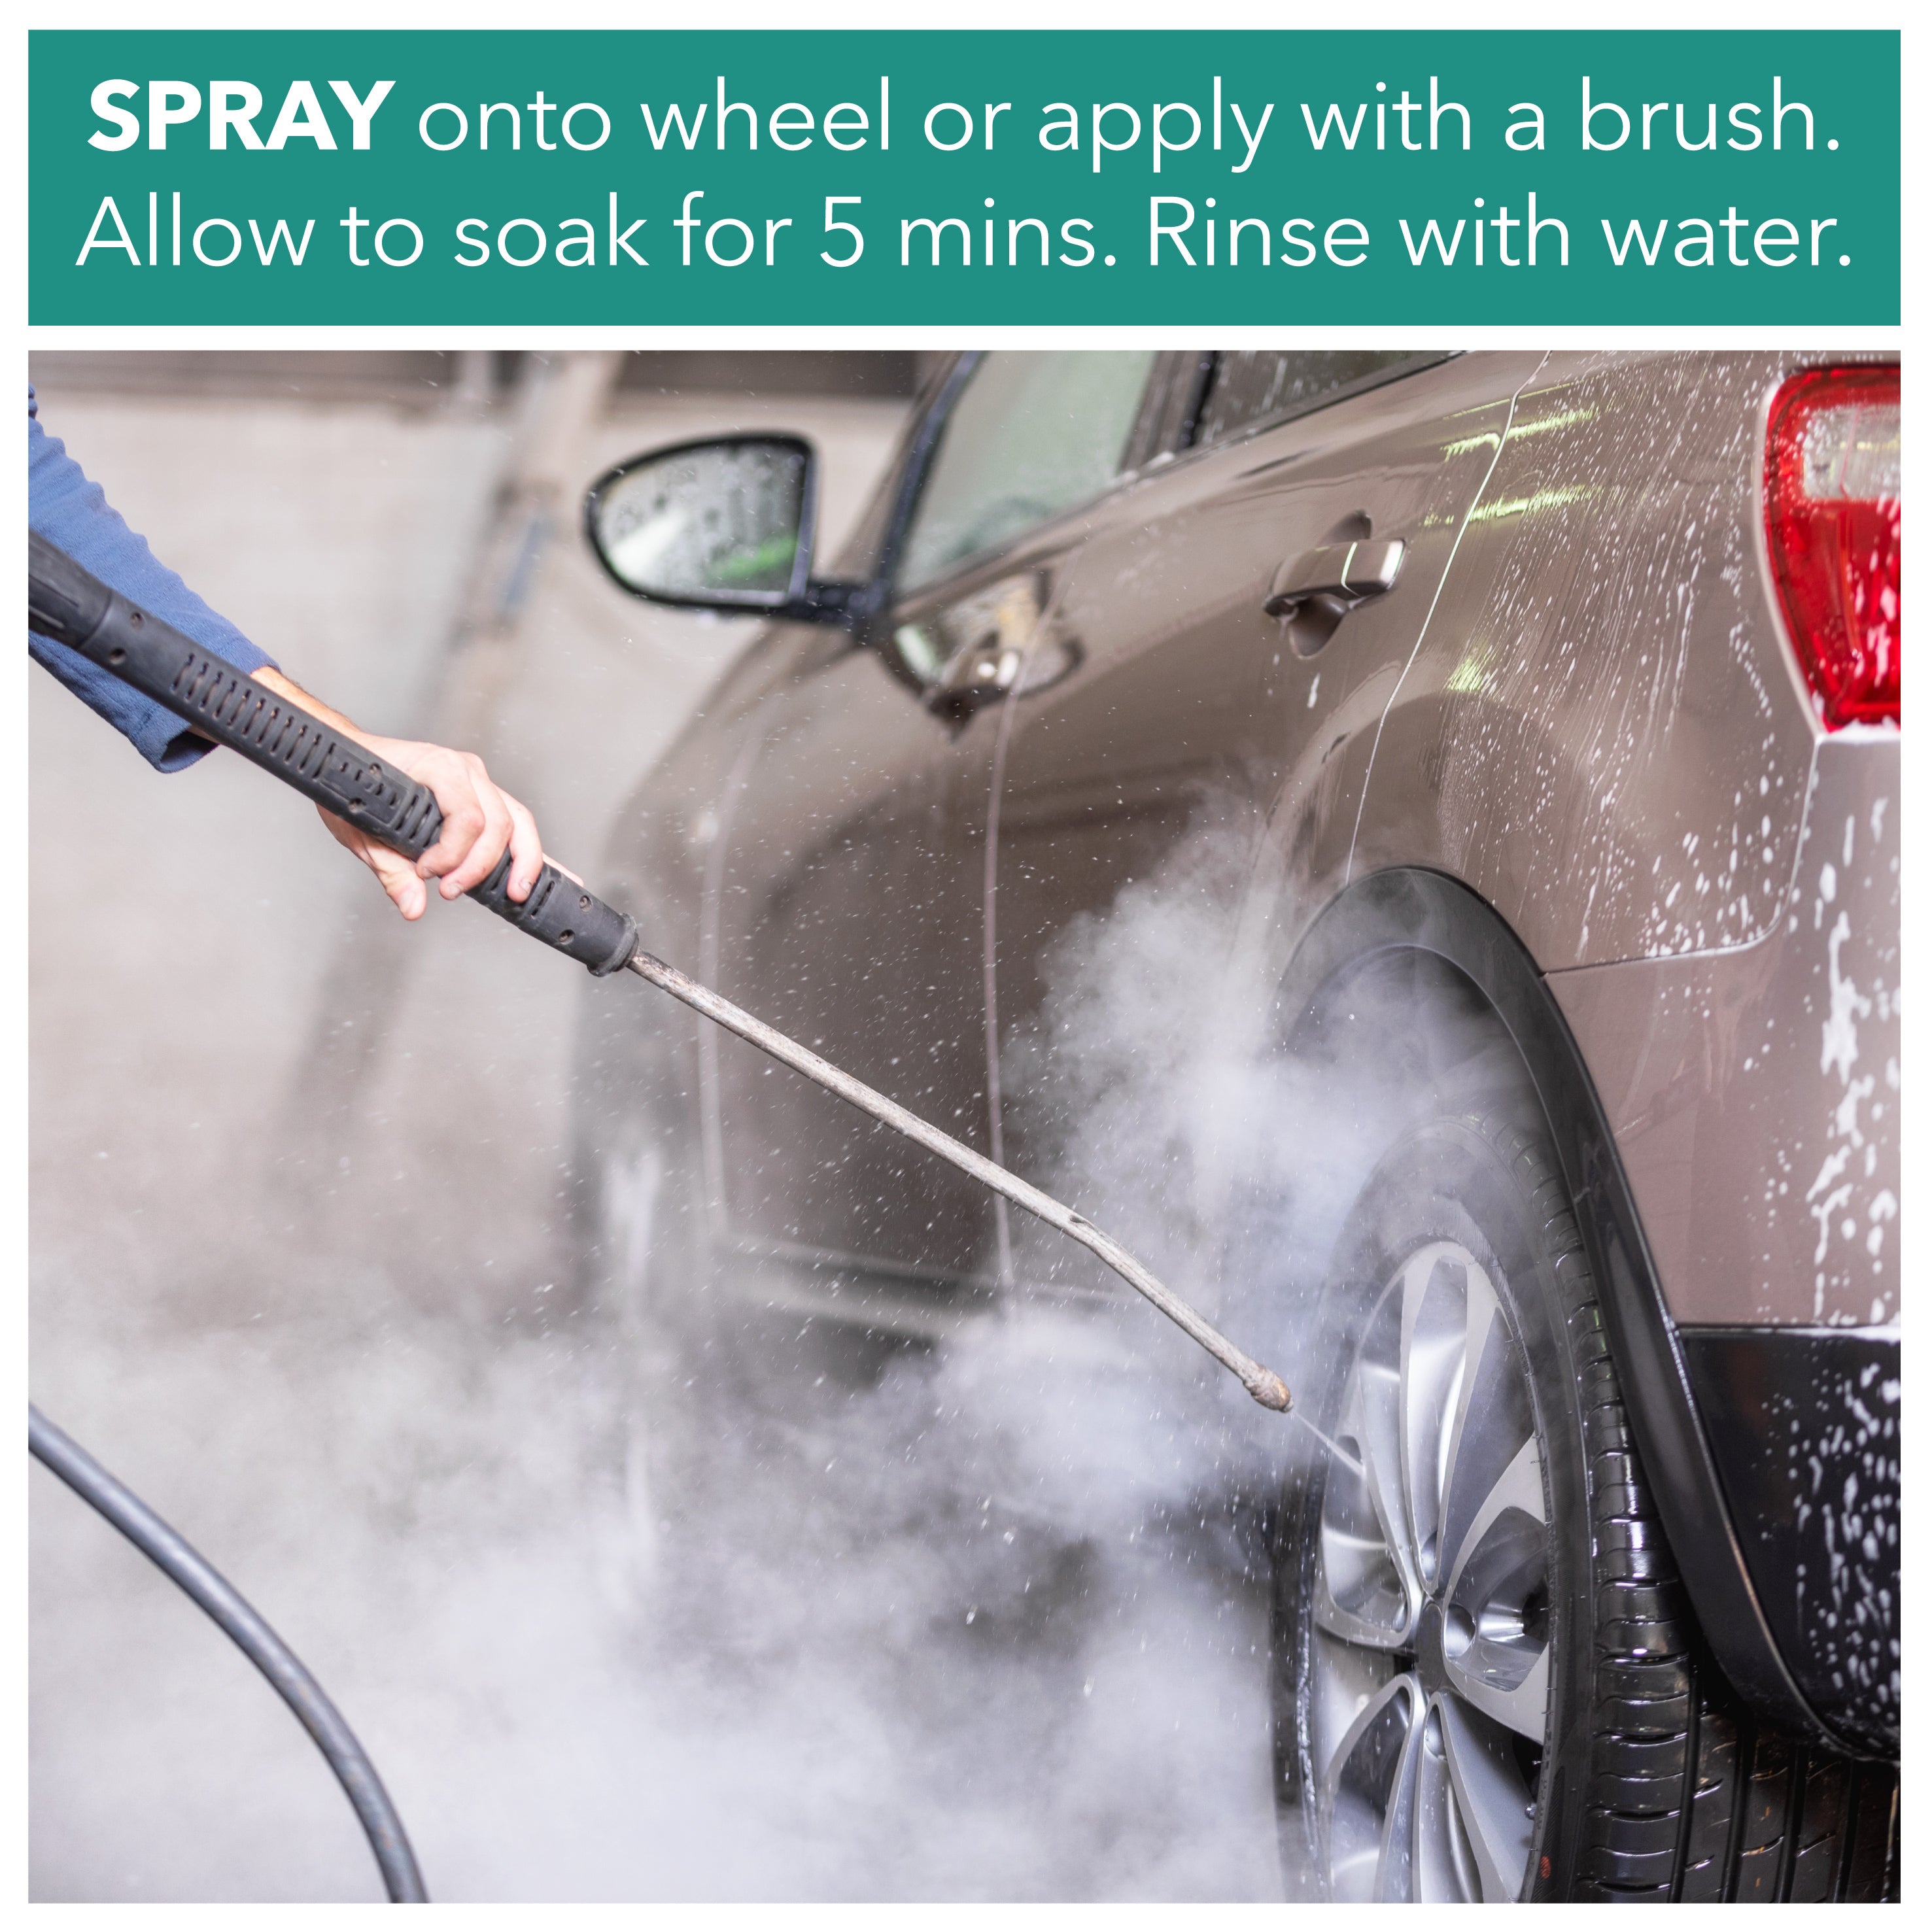 spray onto wheel or apply with a brush, allow to soak for 5 mins, rinse with water